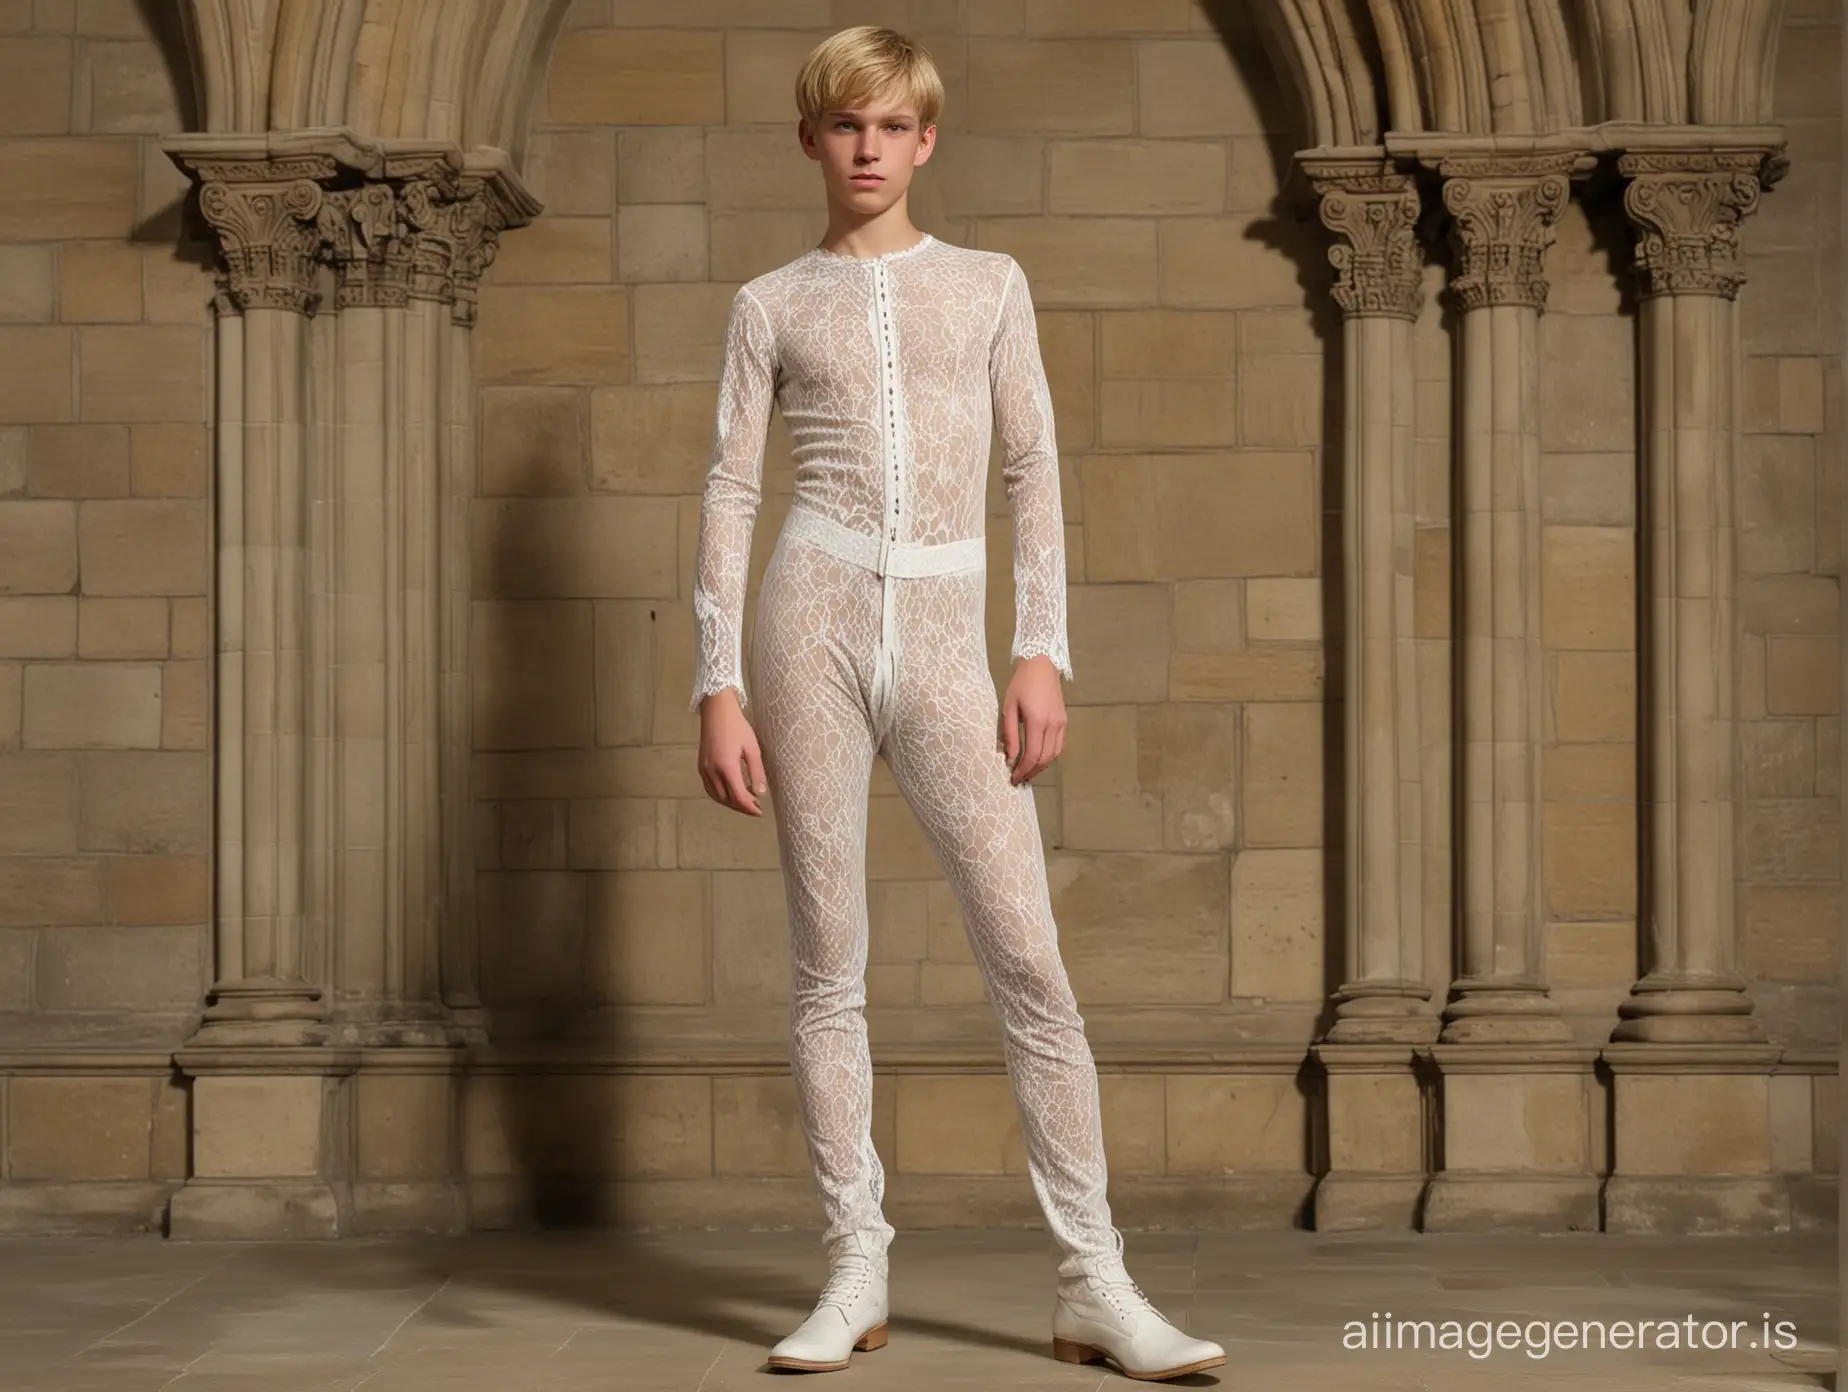 A 15-year-old white boy, he is very slim and has very narrow hips and has blonde hair. Thin arms. He wears a very skin-tight, white lace jumpsuit that looks like nude; the surface of the fabric is absolutely flat. The material has no closure. His hands are free. The head is also free. The figure is wearing knee-high boots. He stands in a the nave of a gothic church.